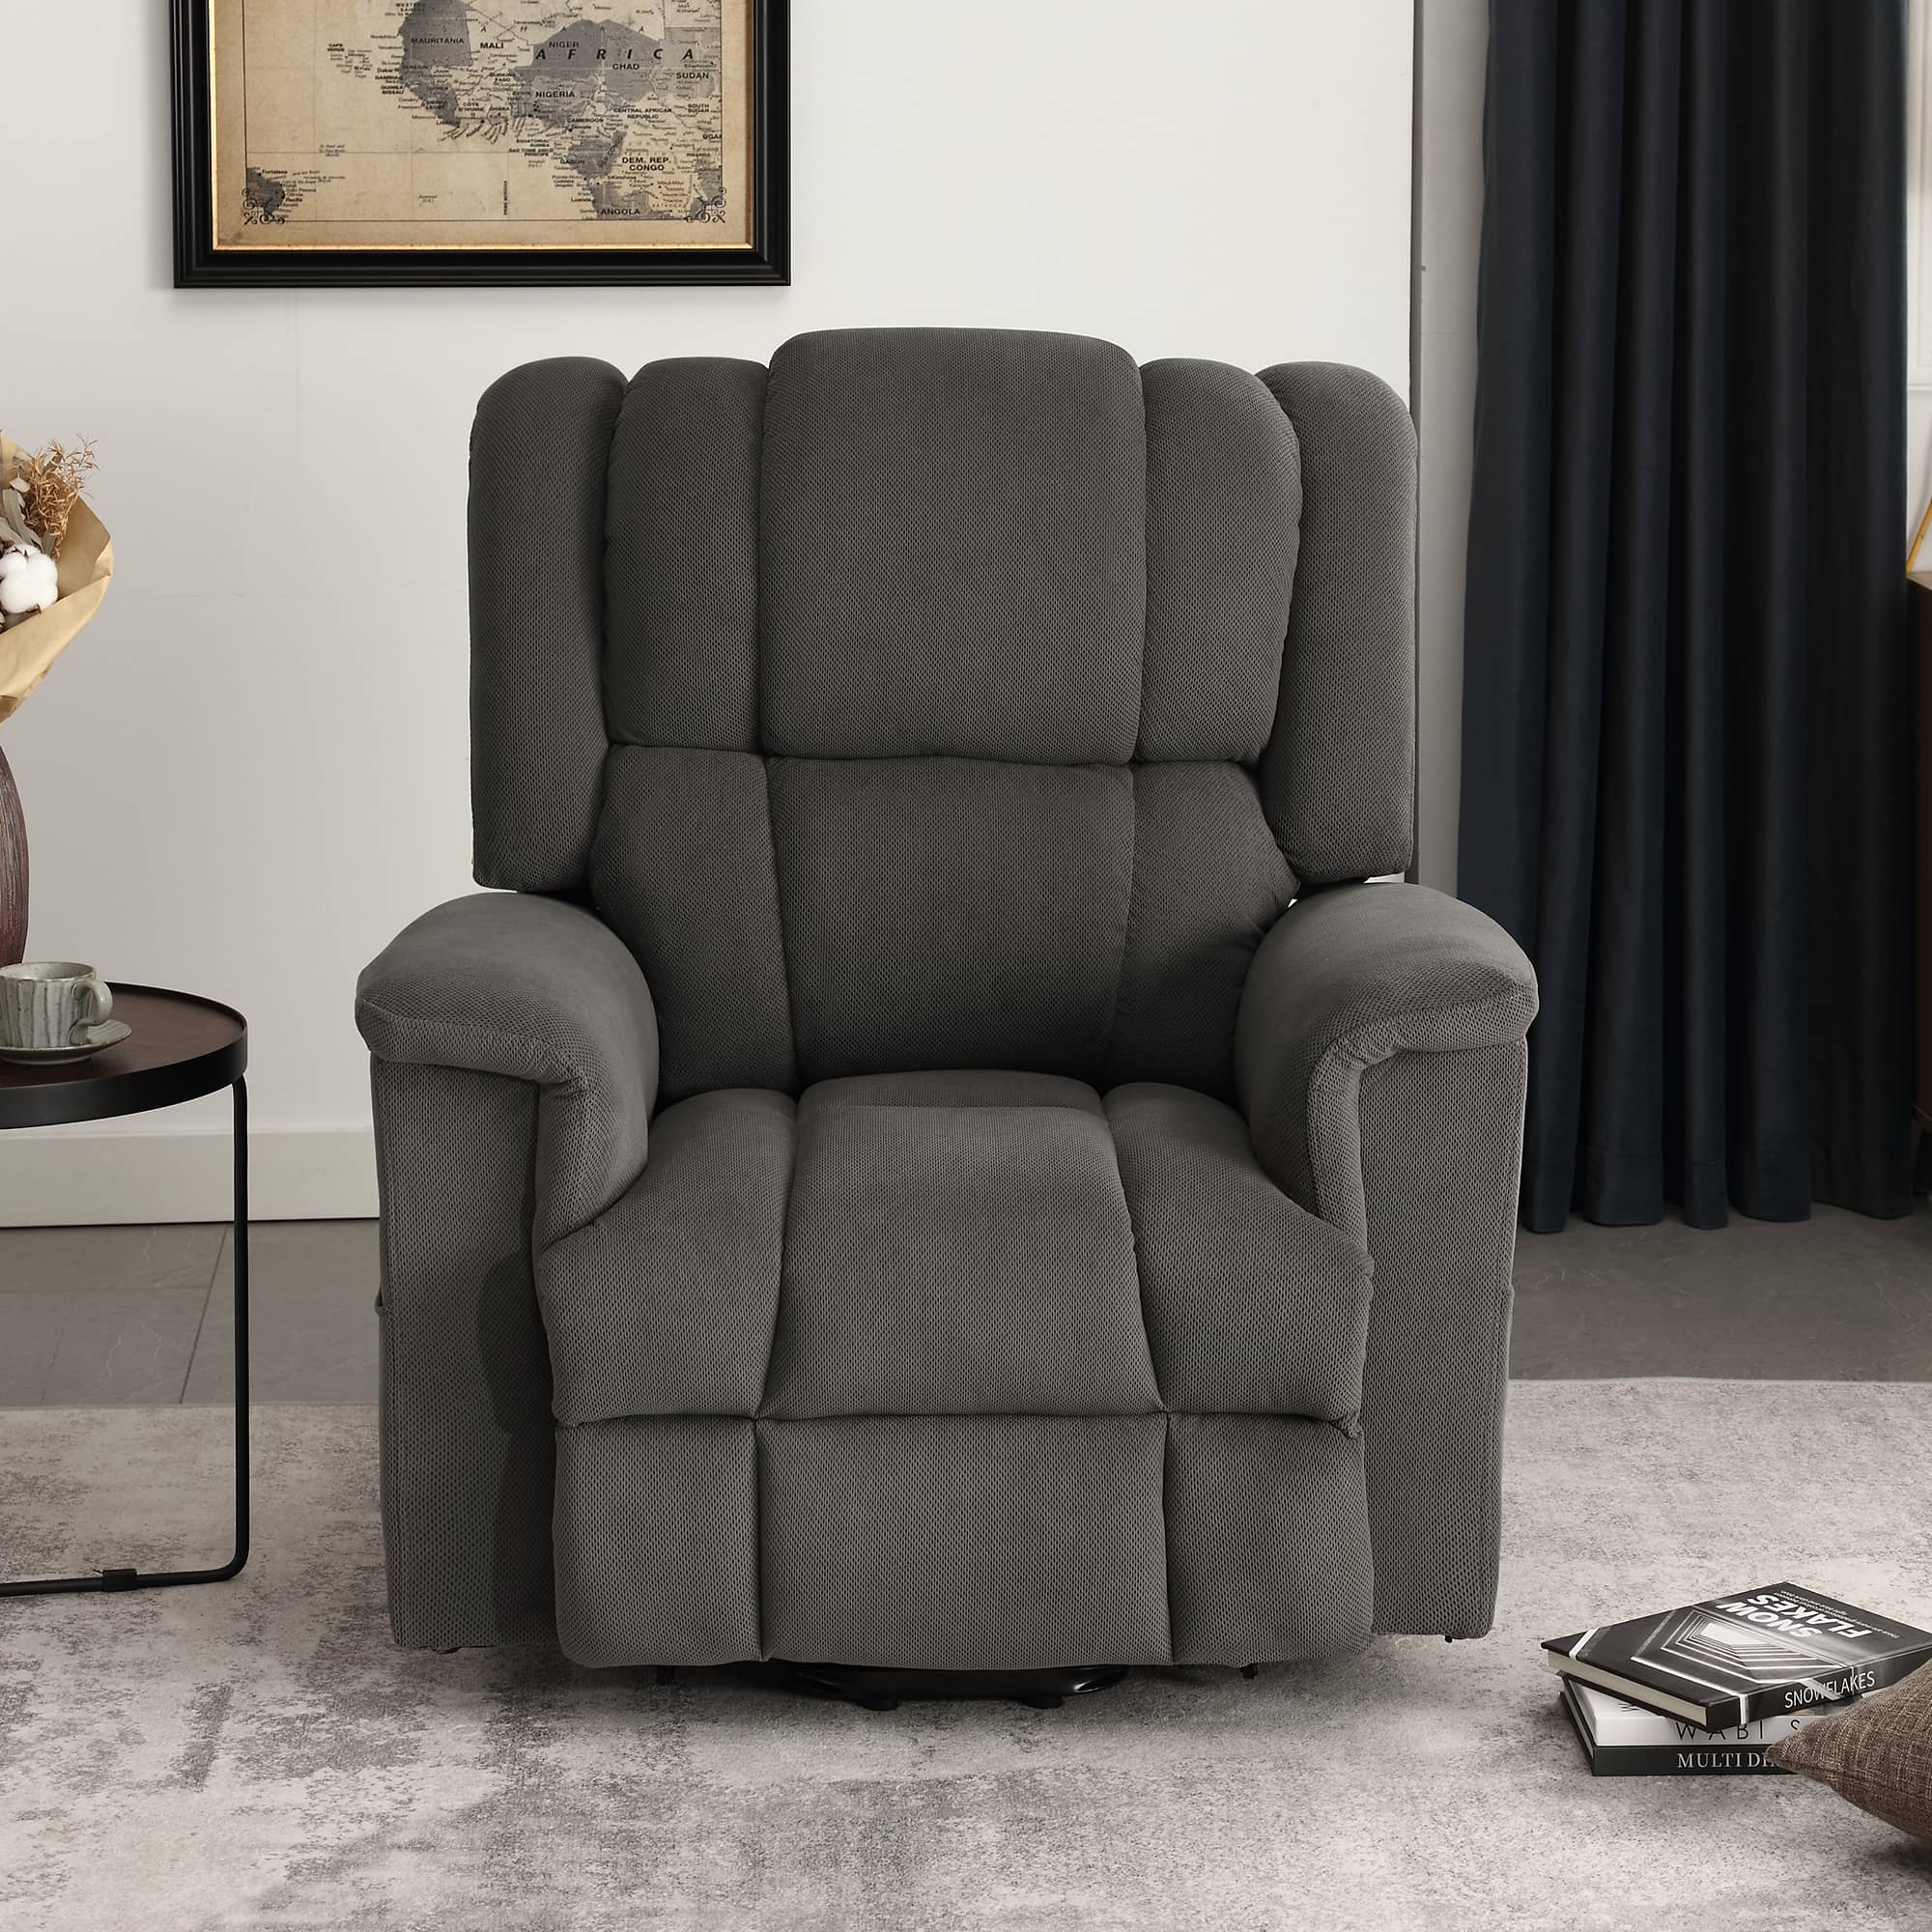 Infinite Position Power Lift Recliner with Heat and Massage, Dark Gray